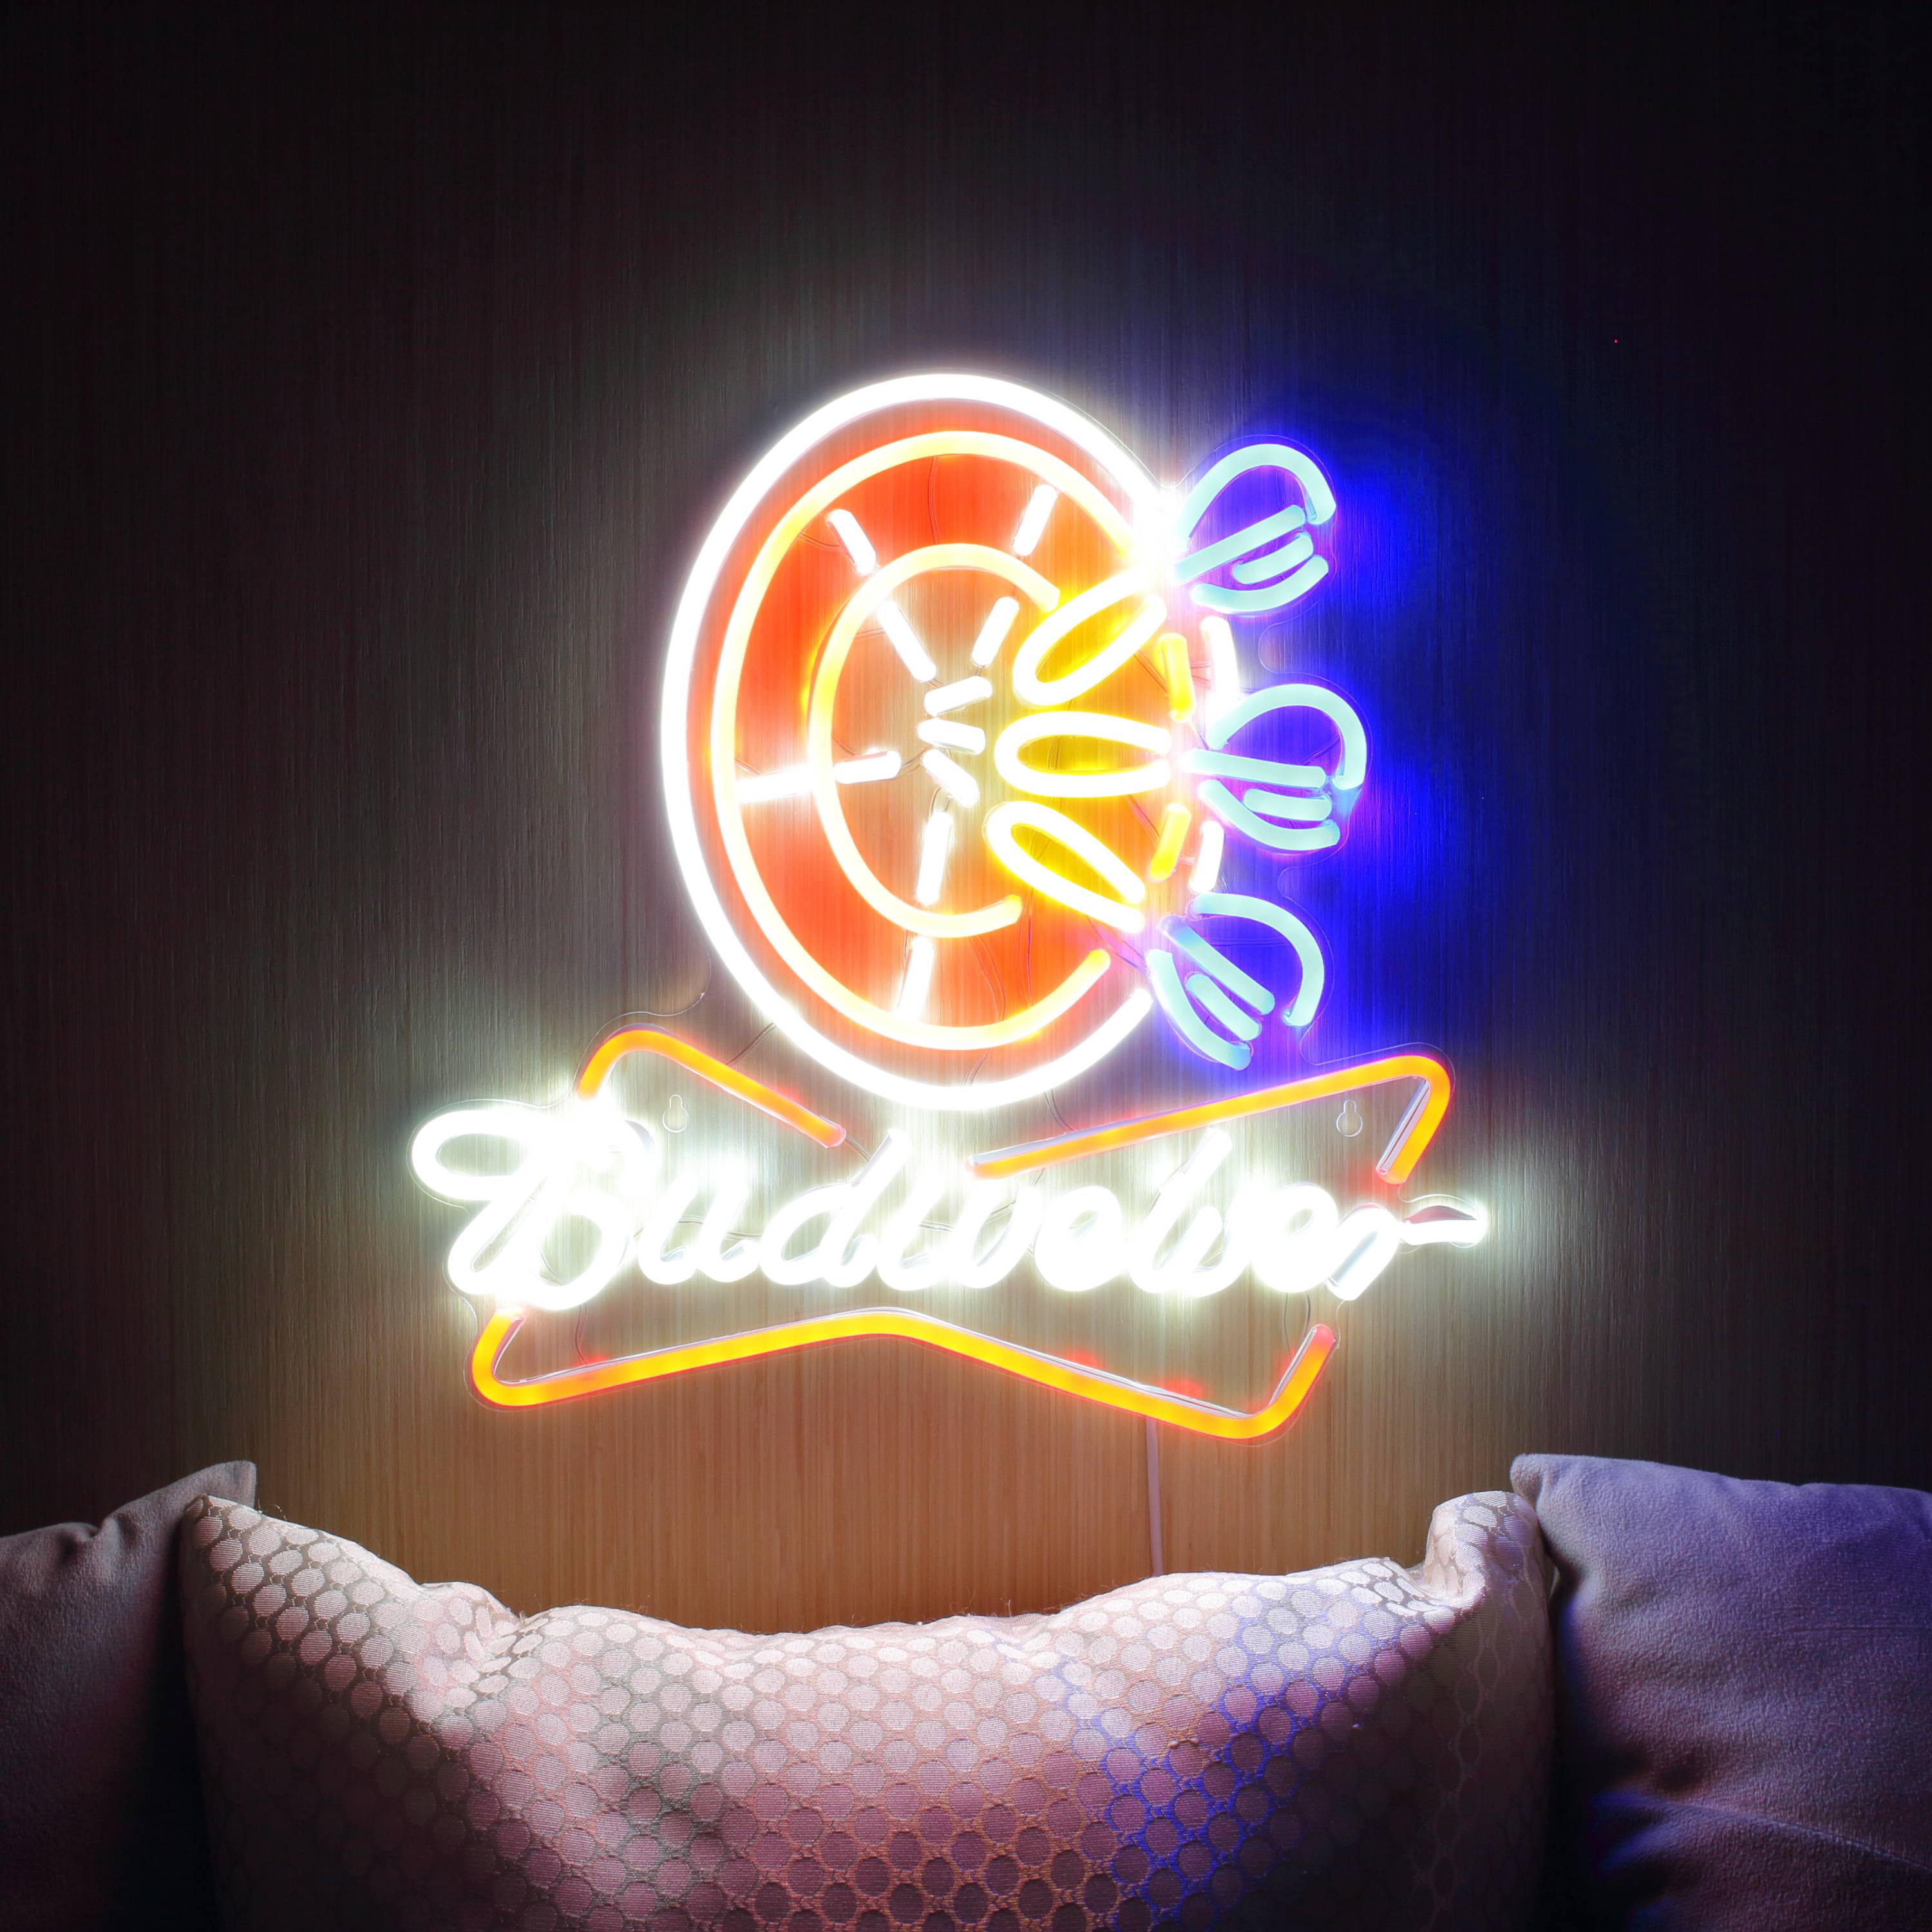 Budweiser with Dart Board Large Flex Neon LED Sign